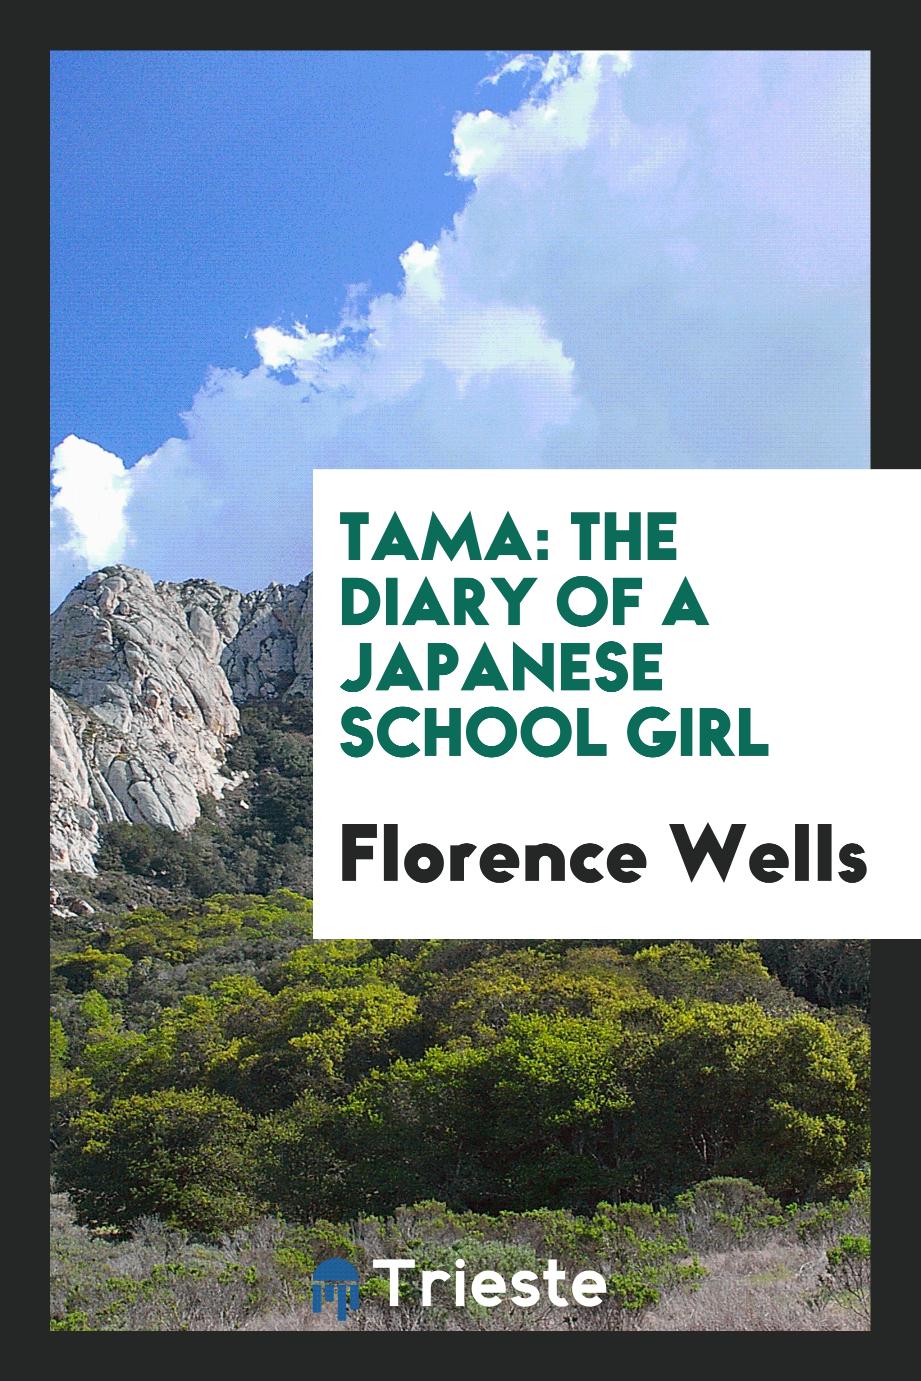 Tama: The Diary of a Japanese School Girl